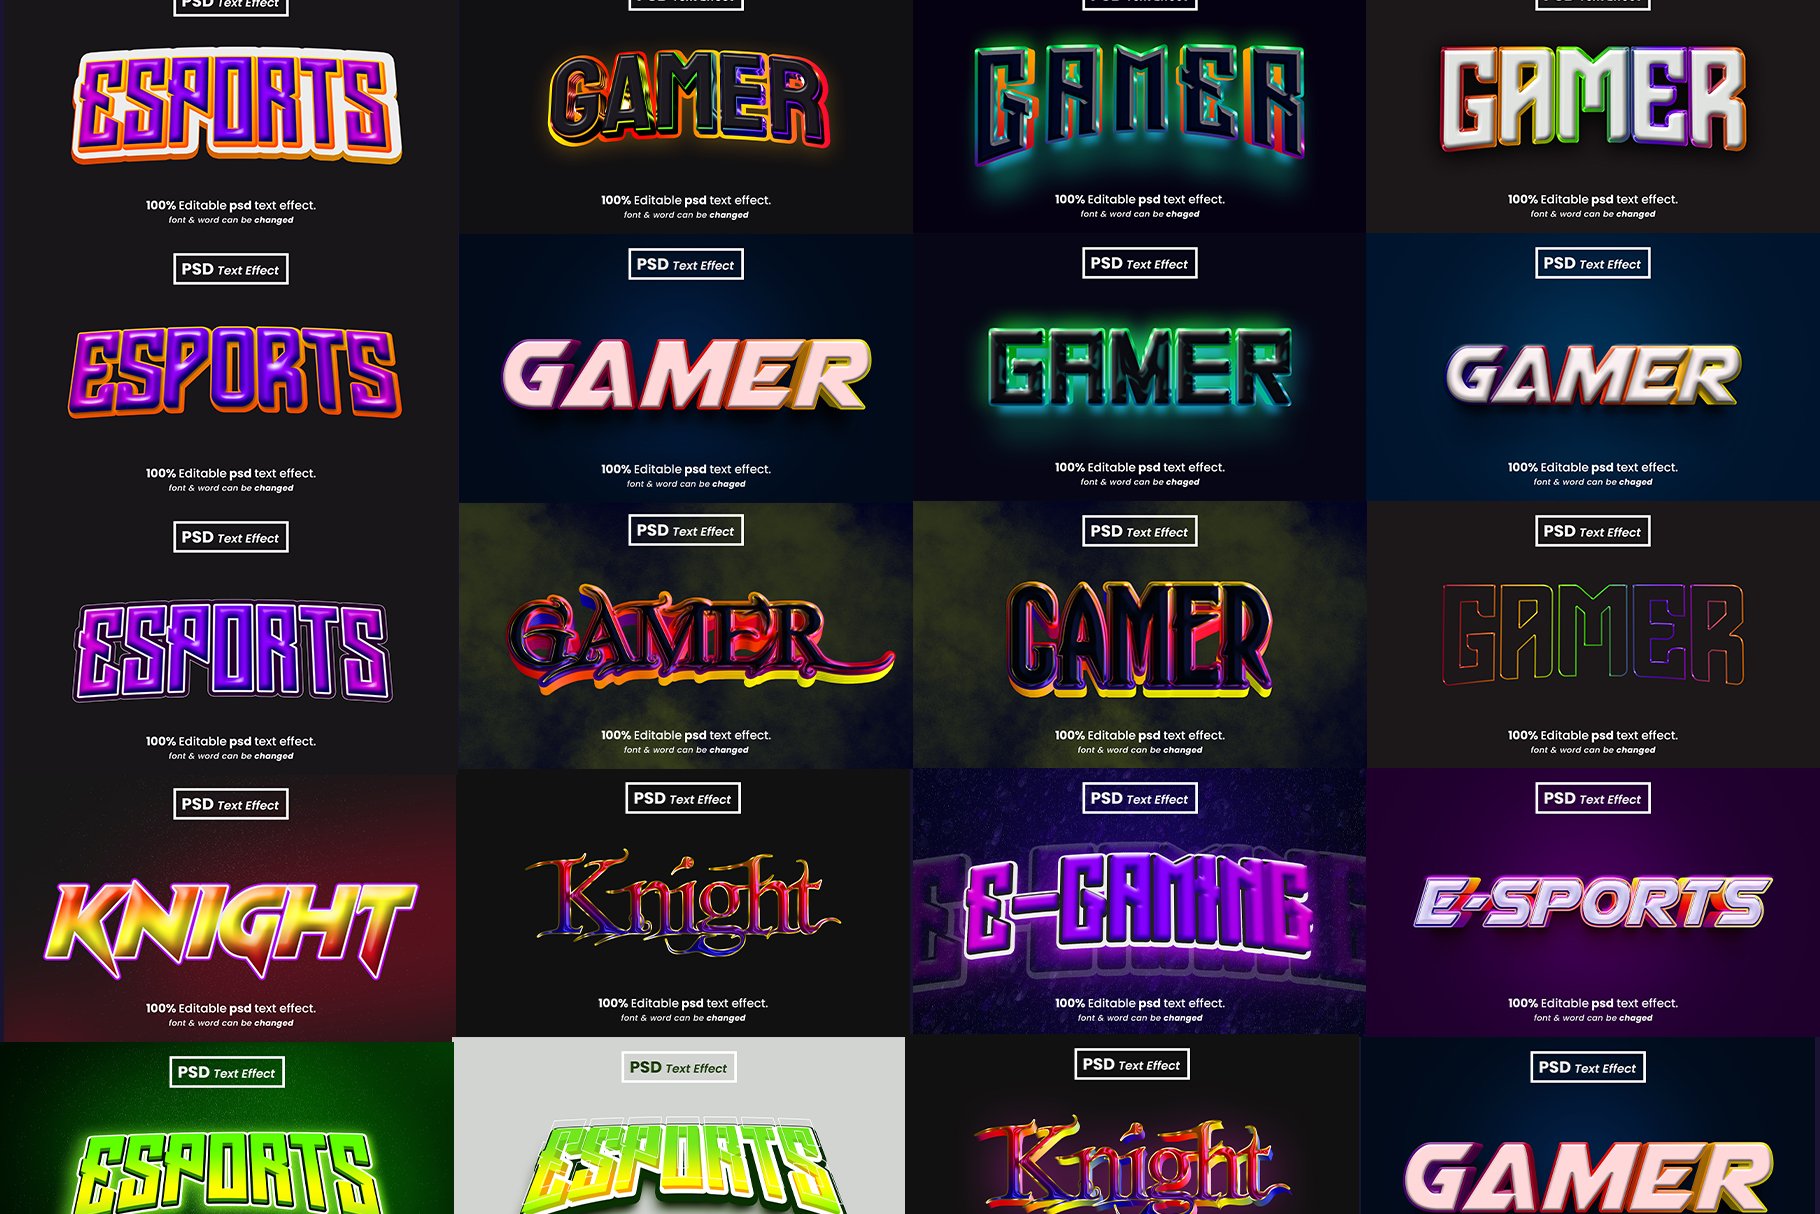 Gamer 3d editable psd text effectpreview image.